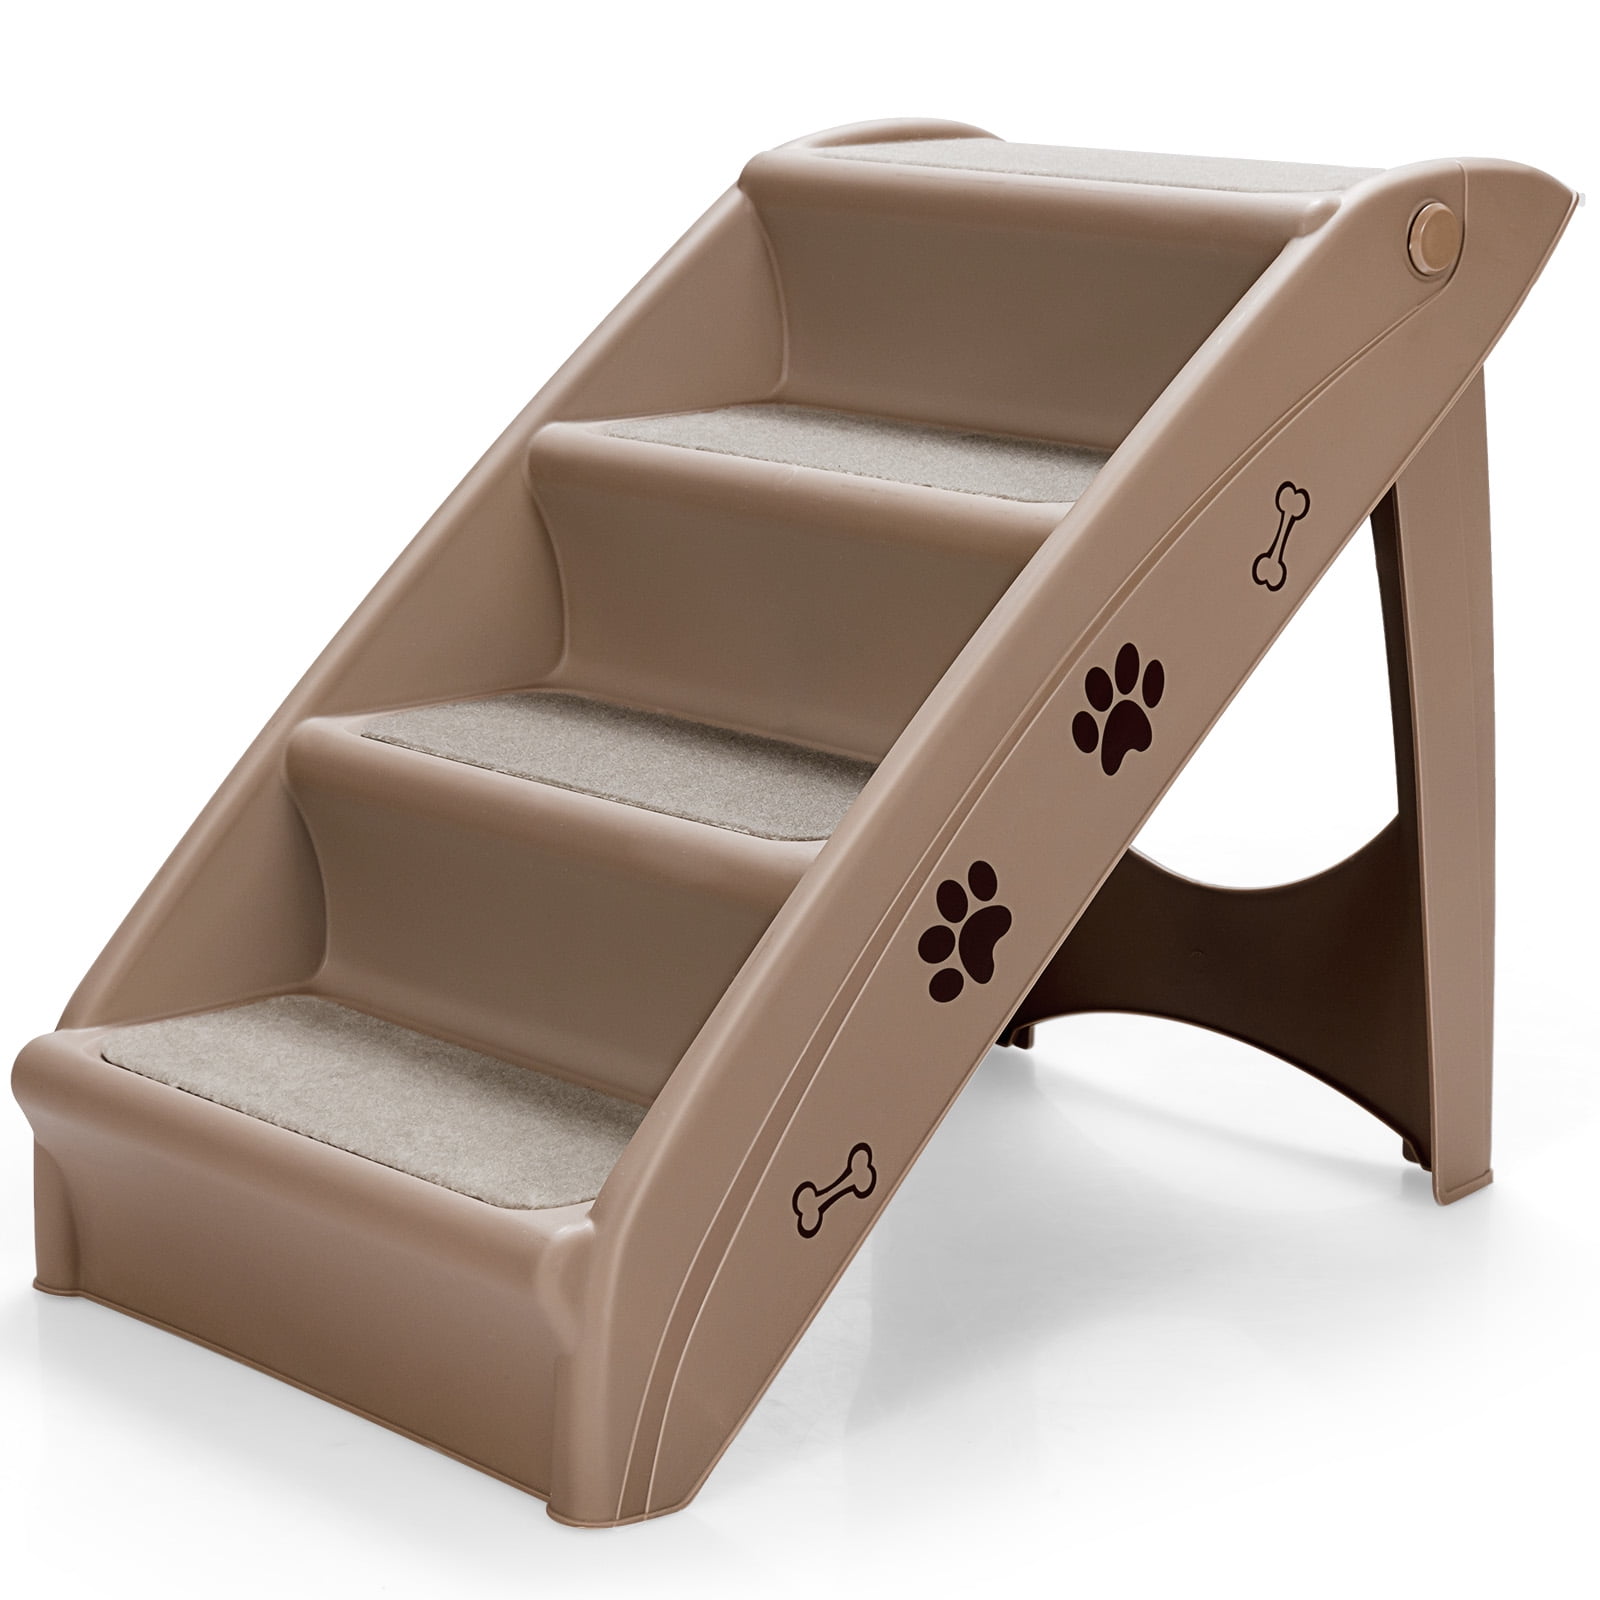 Lightweight & Durable #G-B703A00A0-US Solution4Patio Foldable Plastic Cat & Dog Stairs 3 Steps Nonslip with Removable Washable Carpet Tread 15.1 H Pet Steps for Small Dogs Climbing Bed or Couch 